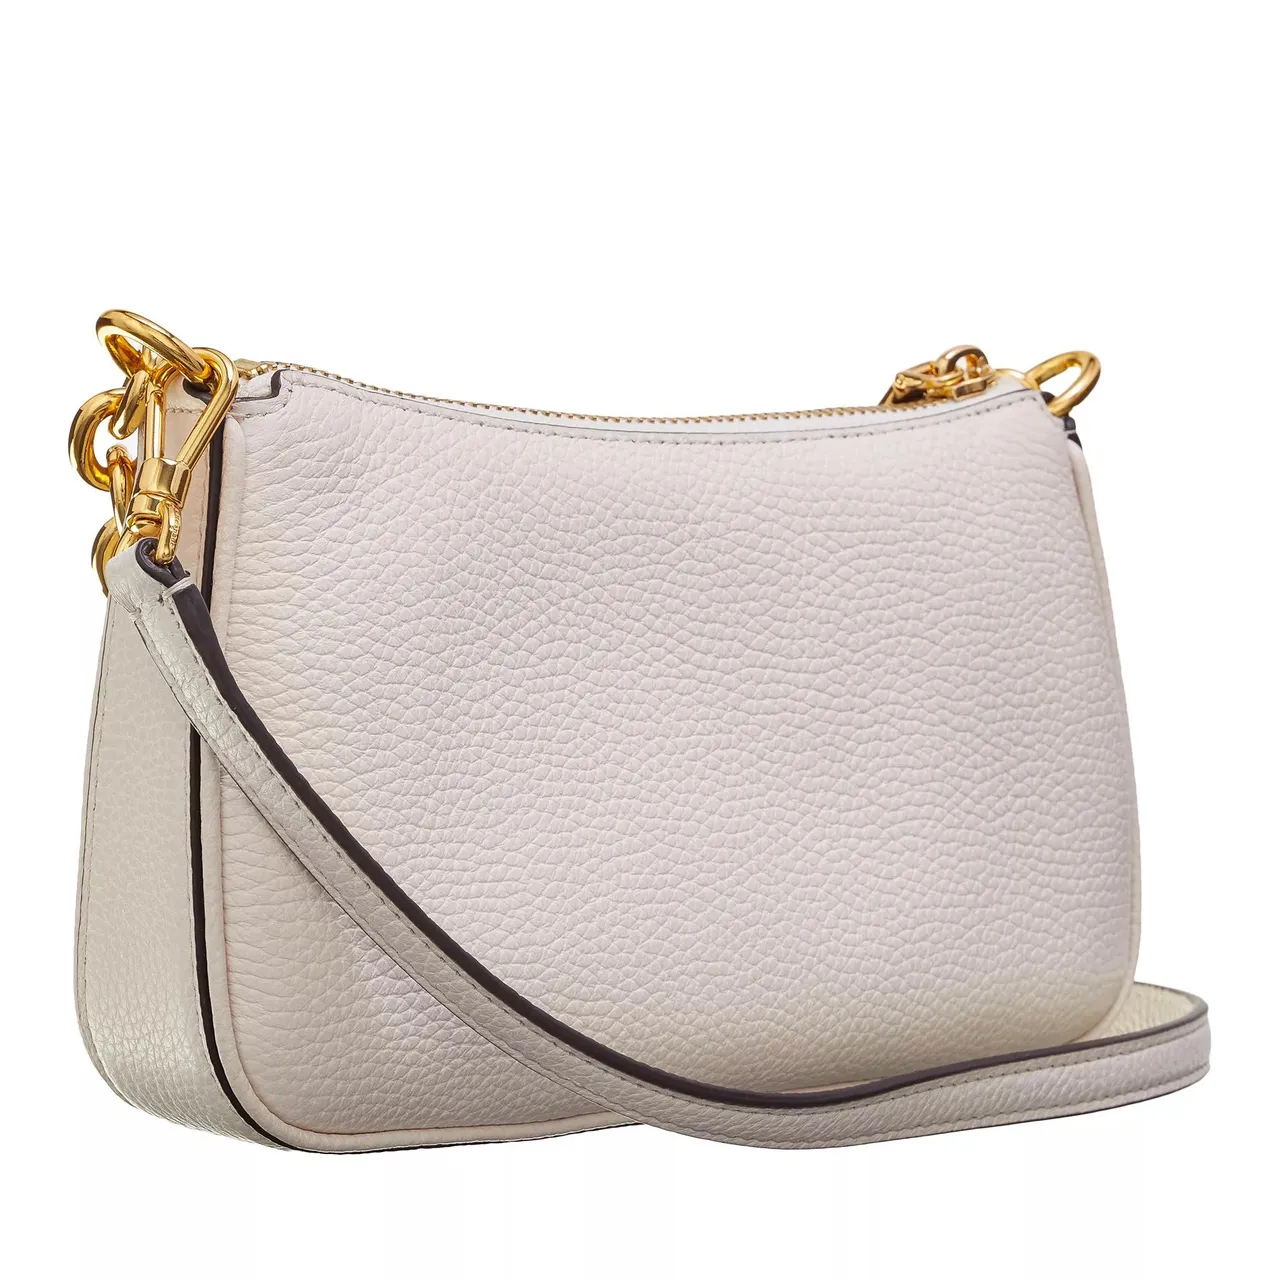 Kate Spade New York Crossbody Bags - Jolie Pebbled Leather Small - creme - Crossbody Bags for ladies